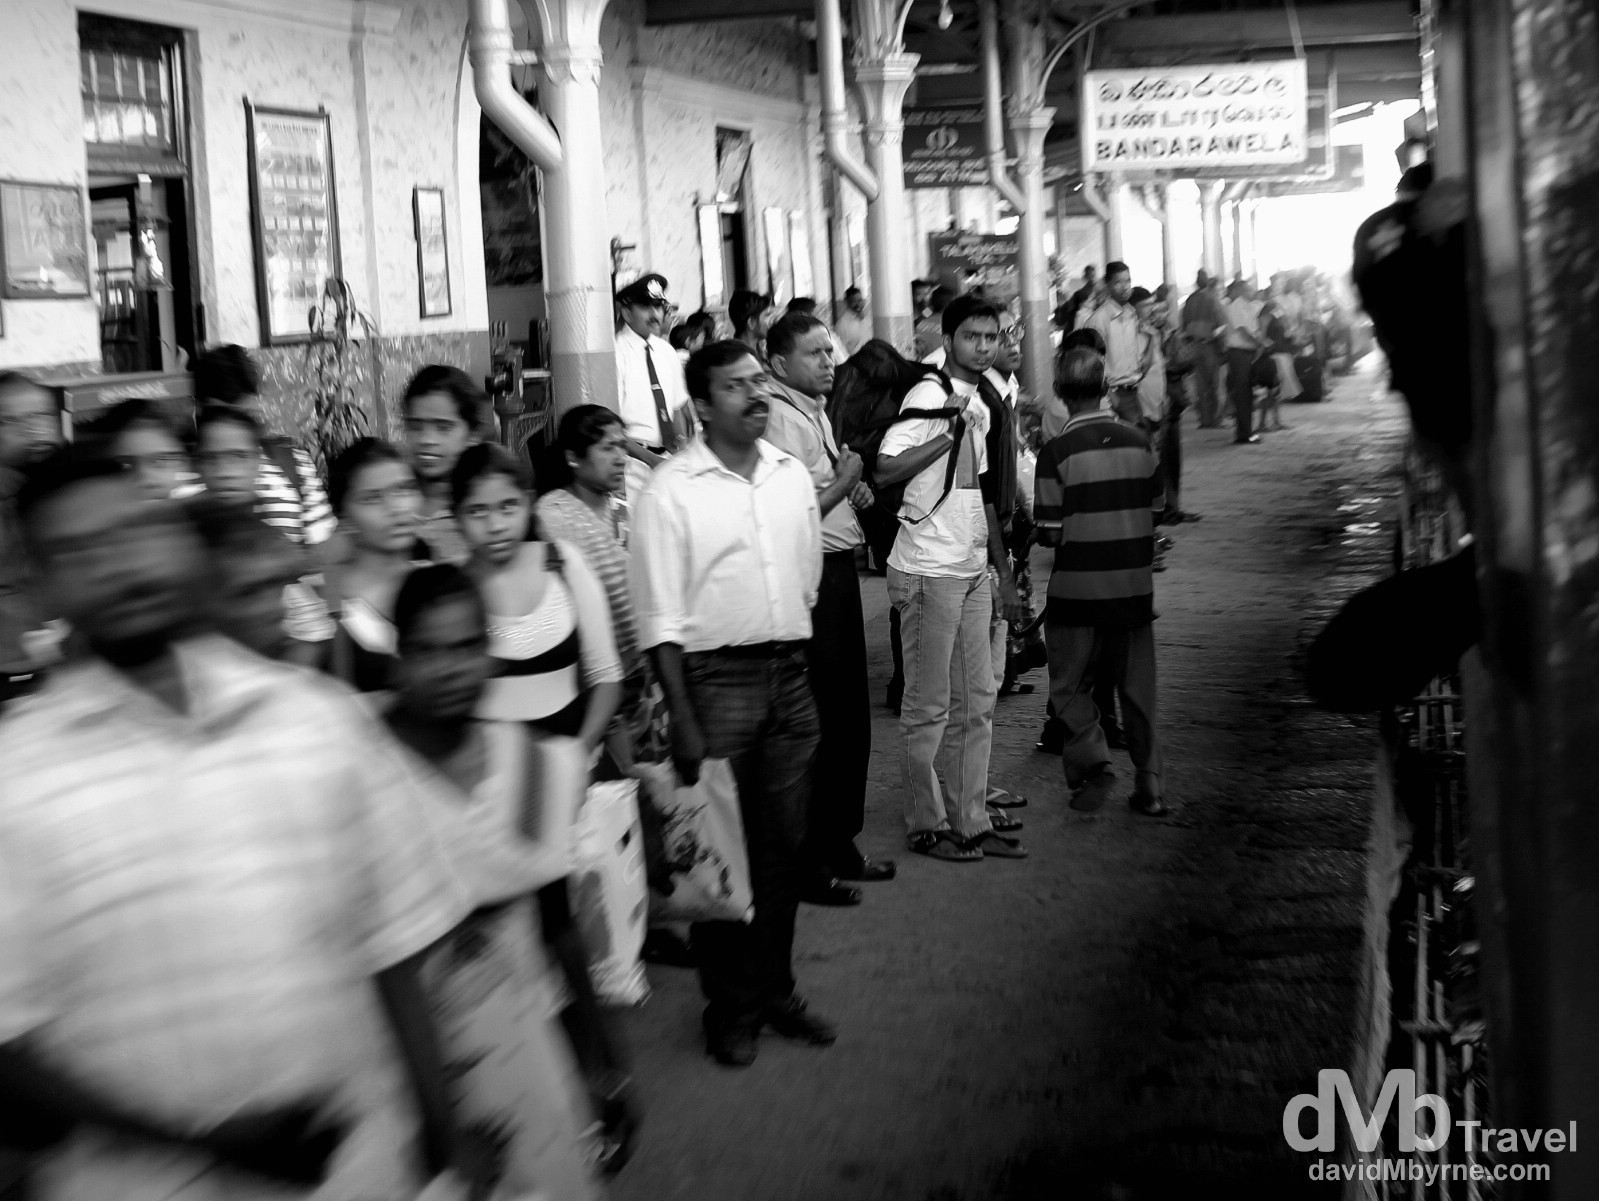 Waiting as the Colombo-bound train approaches. Bandarawela Train Station, central Sri Lanka. September 5th 2012.